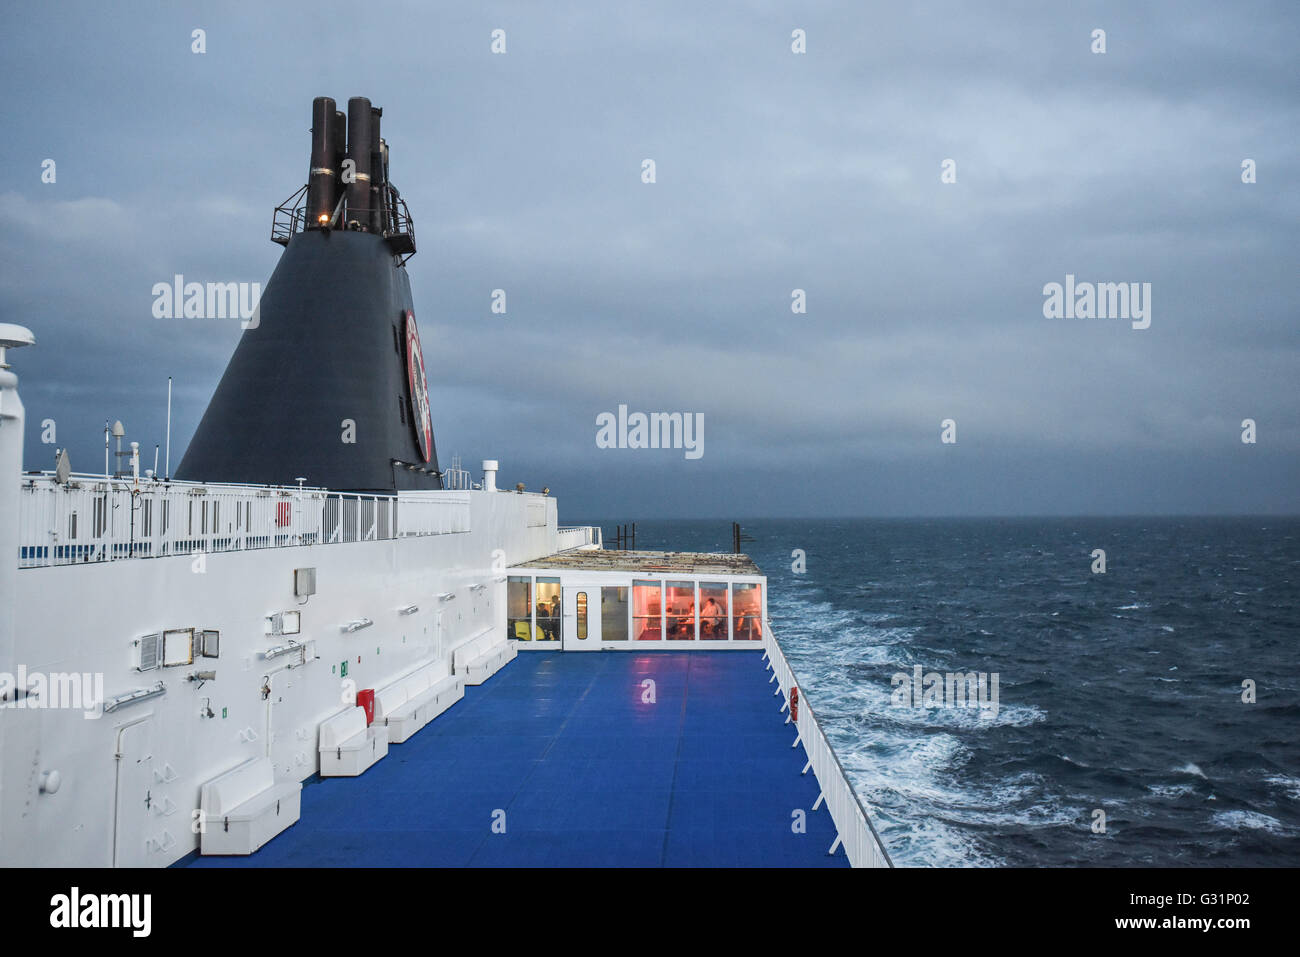 Denmark, views over the upper deck of a ferry of Smyril Line Stock Photo